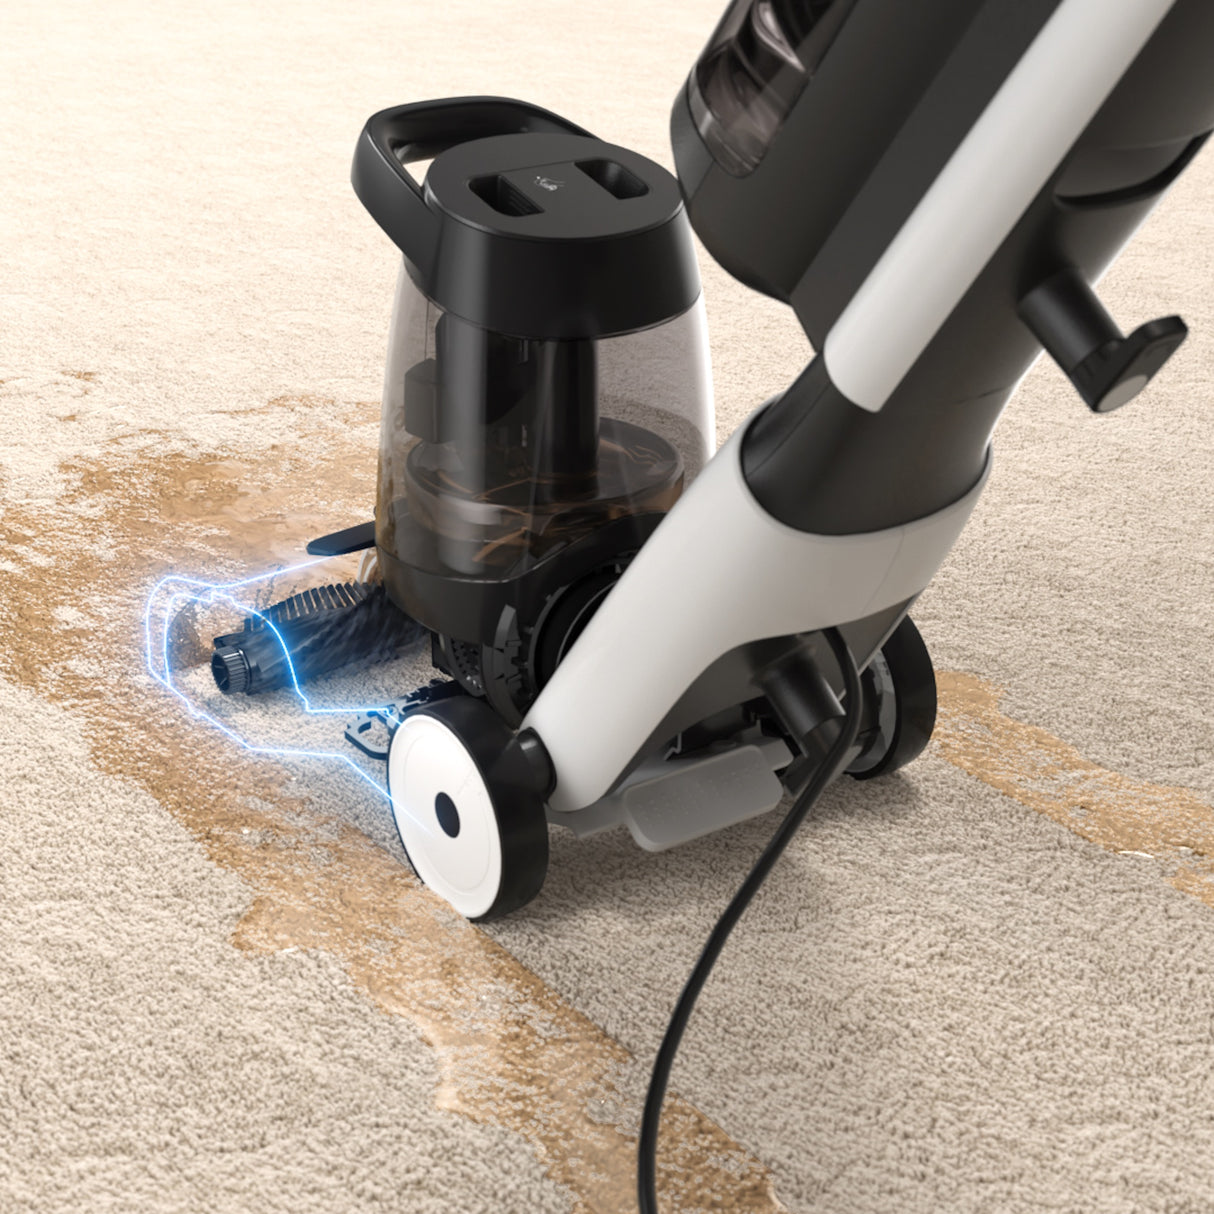 Tineco CARPET ONE PRO - 130W Suction Power, Heated Water Washing, Smart App